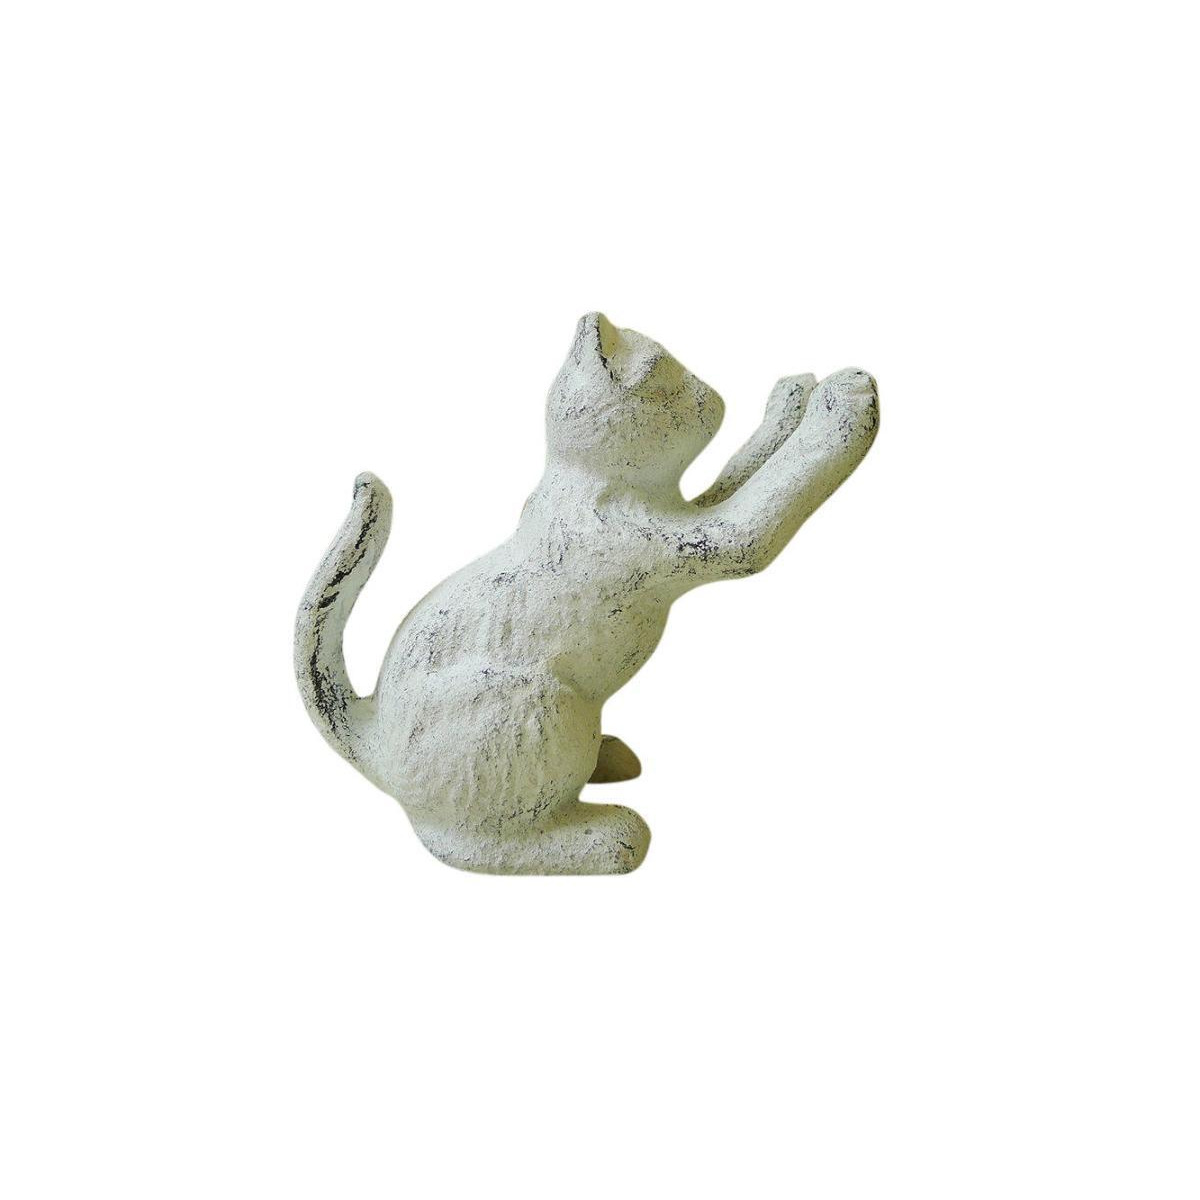 Handcrafted Model Ships k-0892A-w 5 x 2.5 x 5 in. Whitewashed Cast Iron Cat Door Stopper